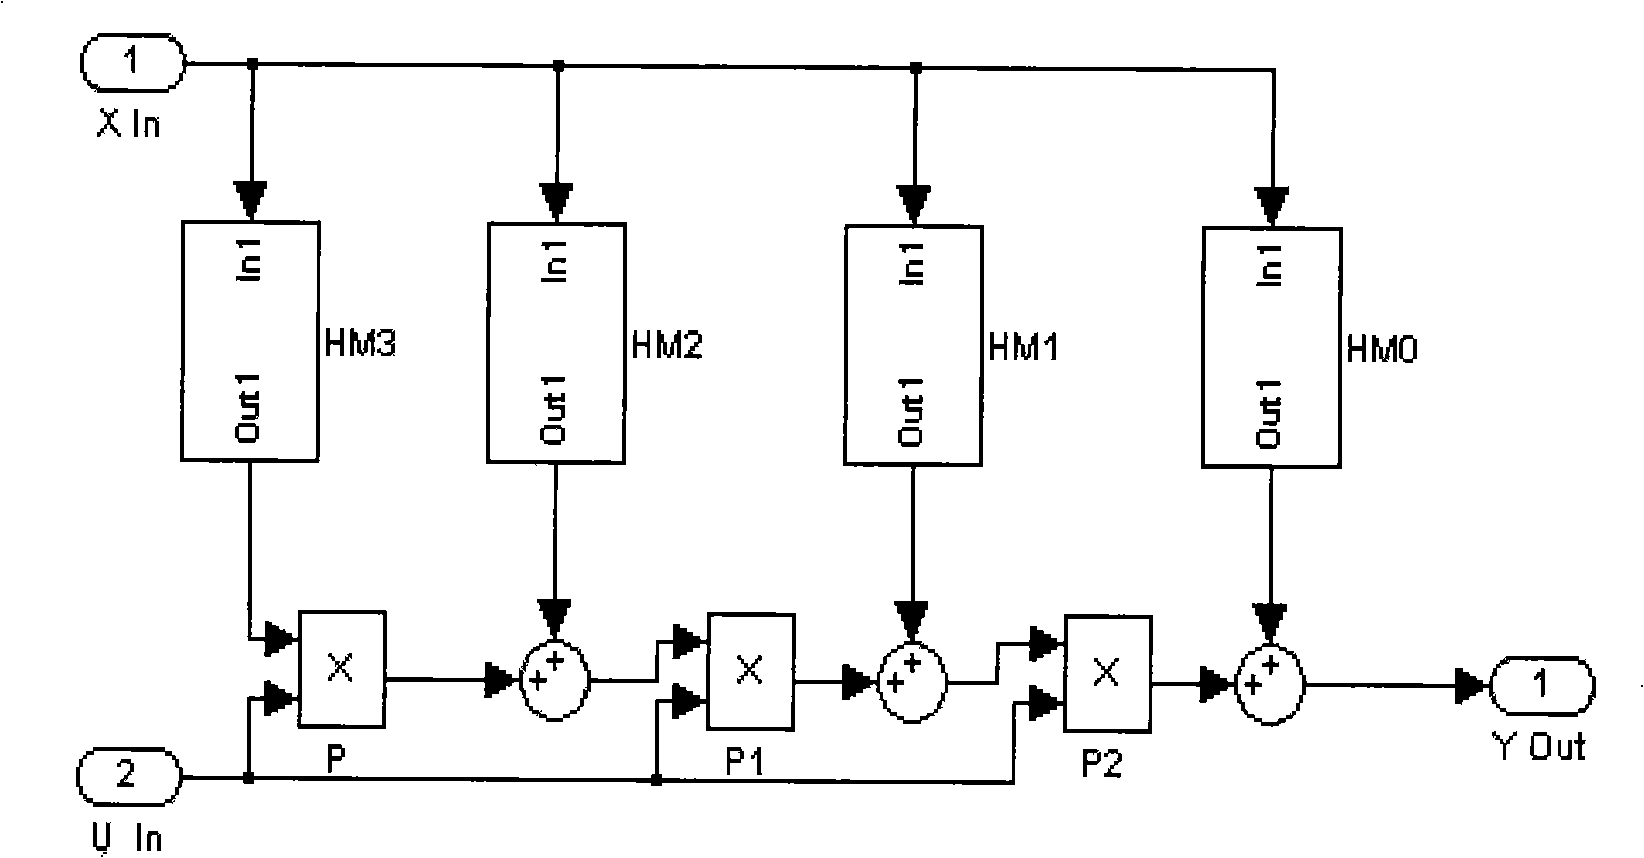 Symbol timing synchronizing apparatus for complete digital receiver